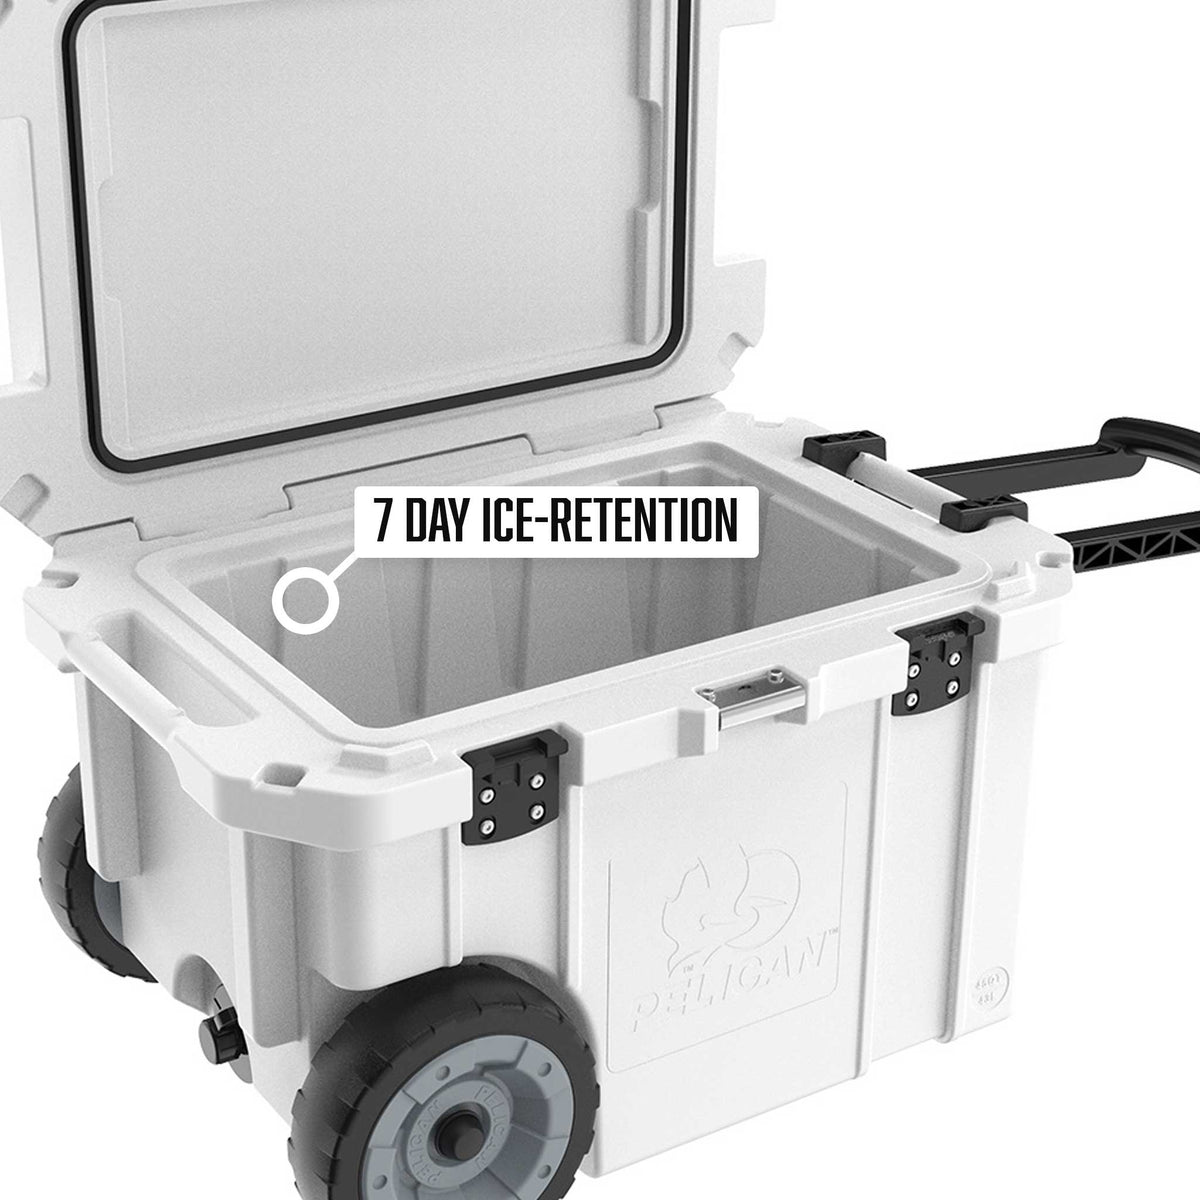 Pelican 45QT Elite Wheeled Cooler gets 7 days of ice retention